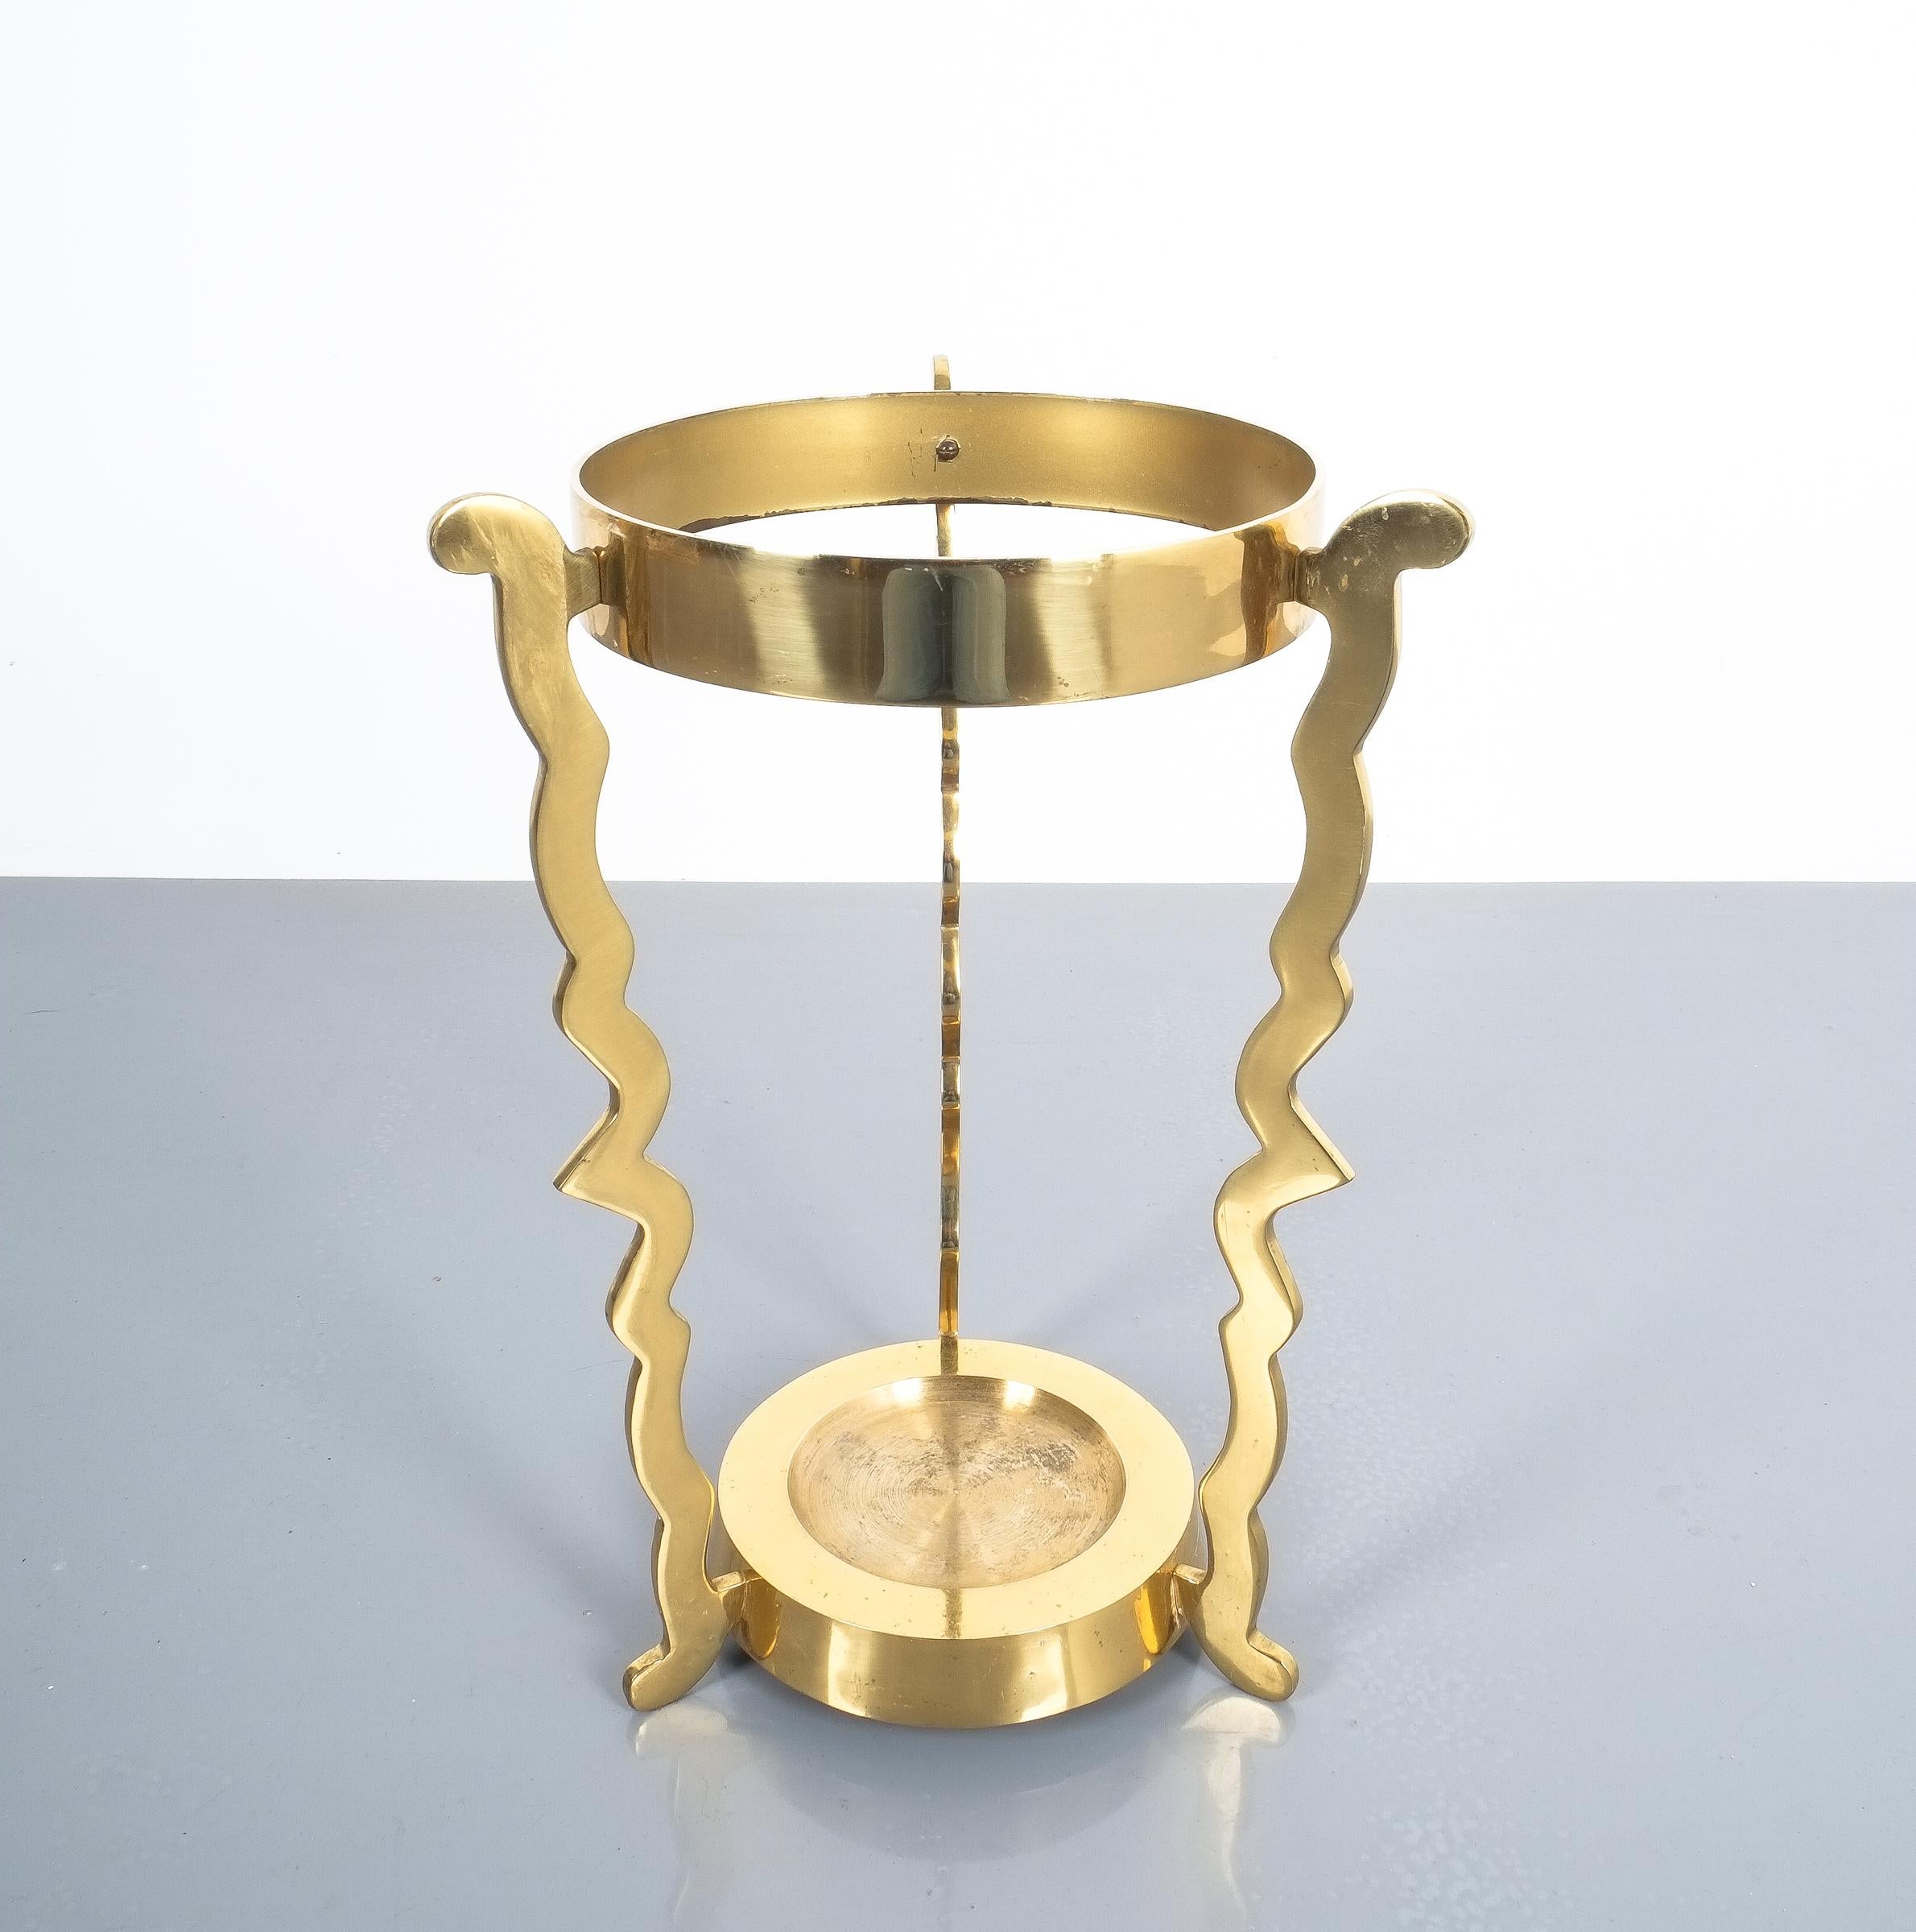 Nice midcentury umbrella stand from solid brass in good vintage condition.